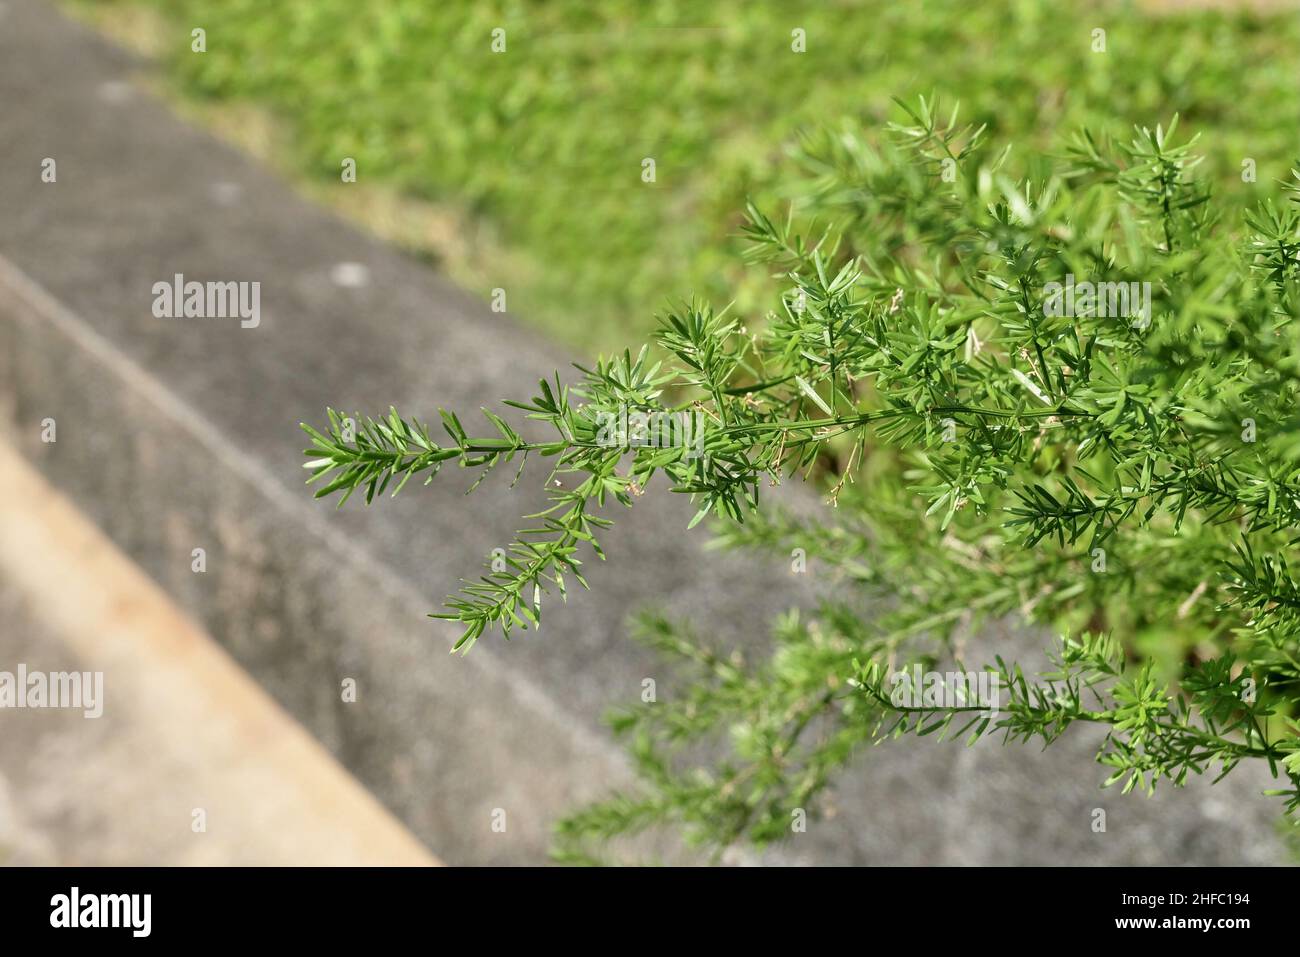 Ecological Concept, Green Foxtail Ferns Or Myers Asparagus Densiflorus Plants for Garden Decoration. Stock Photo